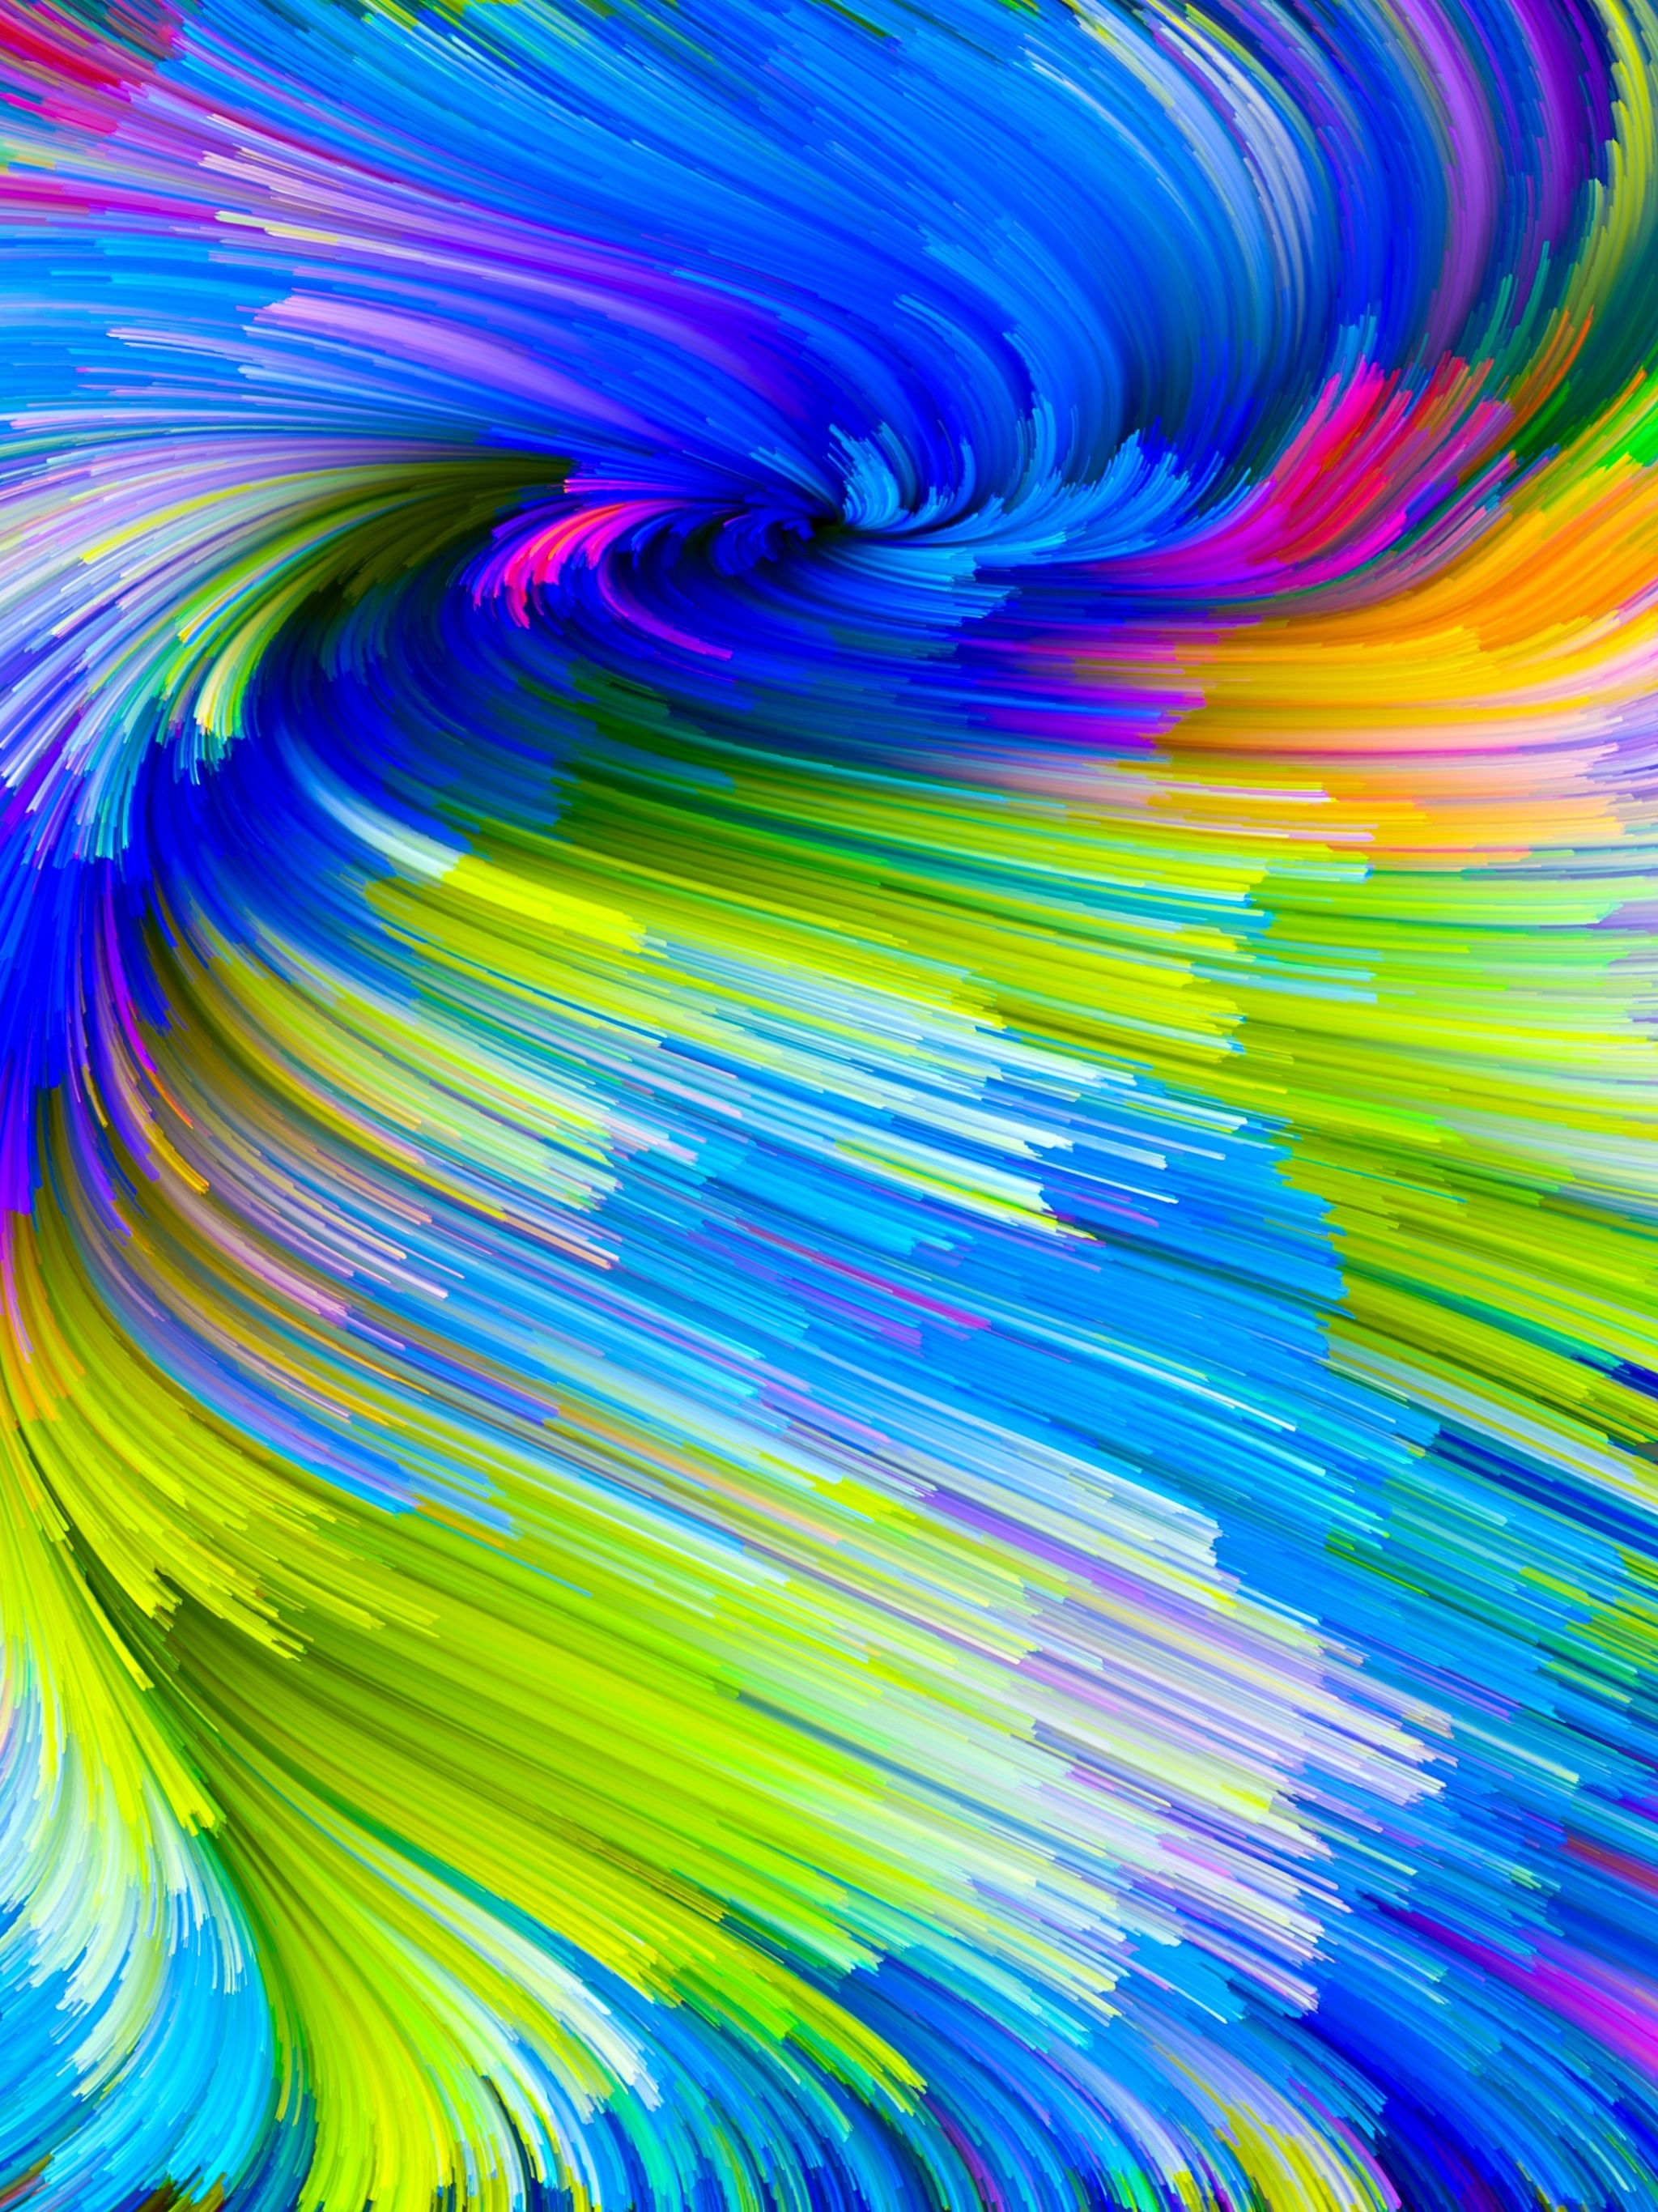 48x2732 Rainbow Paint Splash 48x2732 Resolution Wallpaper Hd Abstract 4k Wallpapers Images Photos And Background